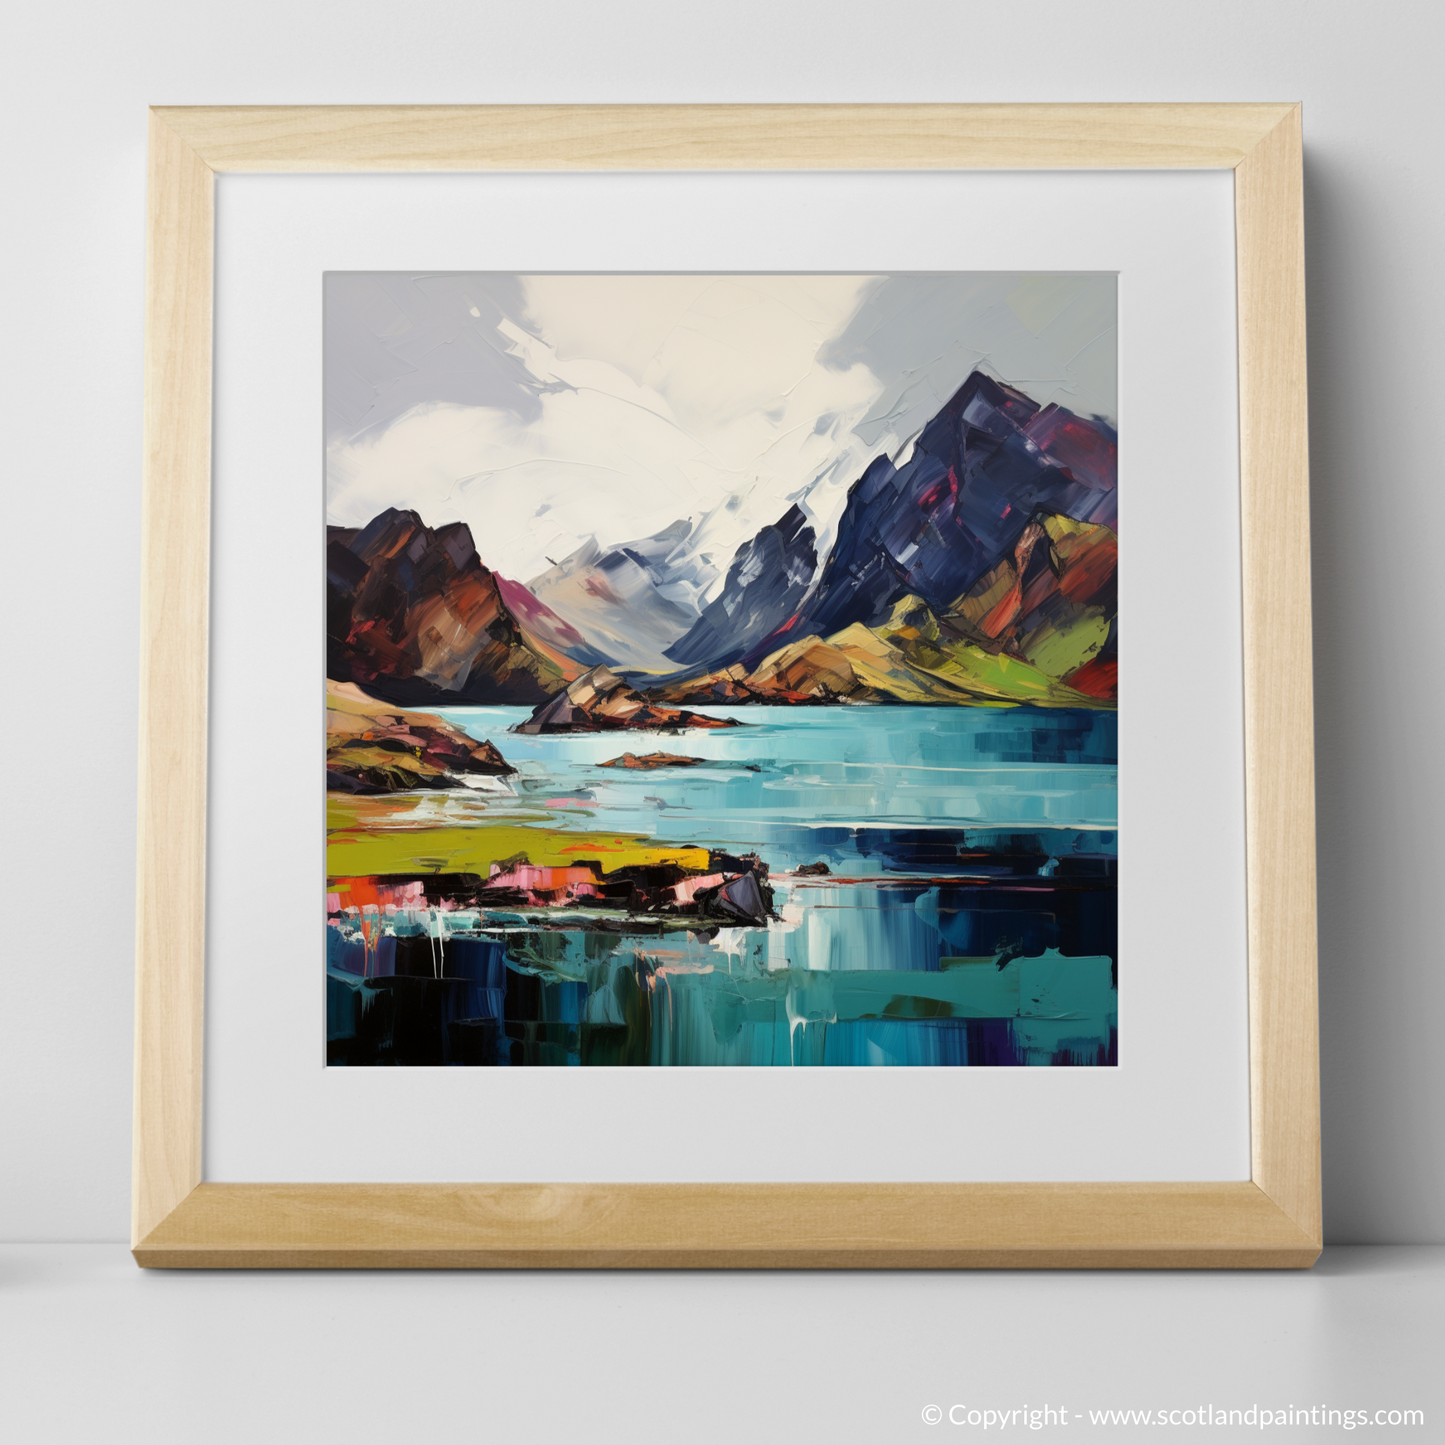 Art Print of Loch Coruisk, Isle of Skye with a natural frame